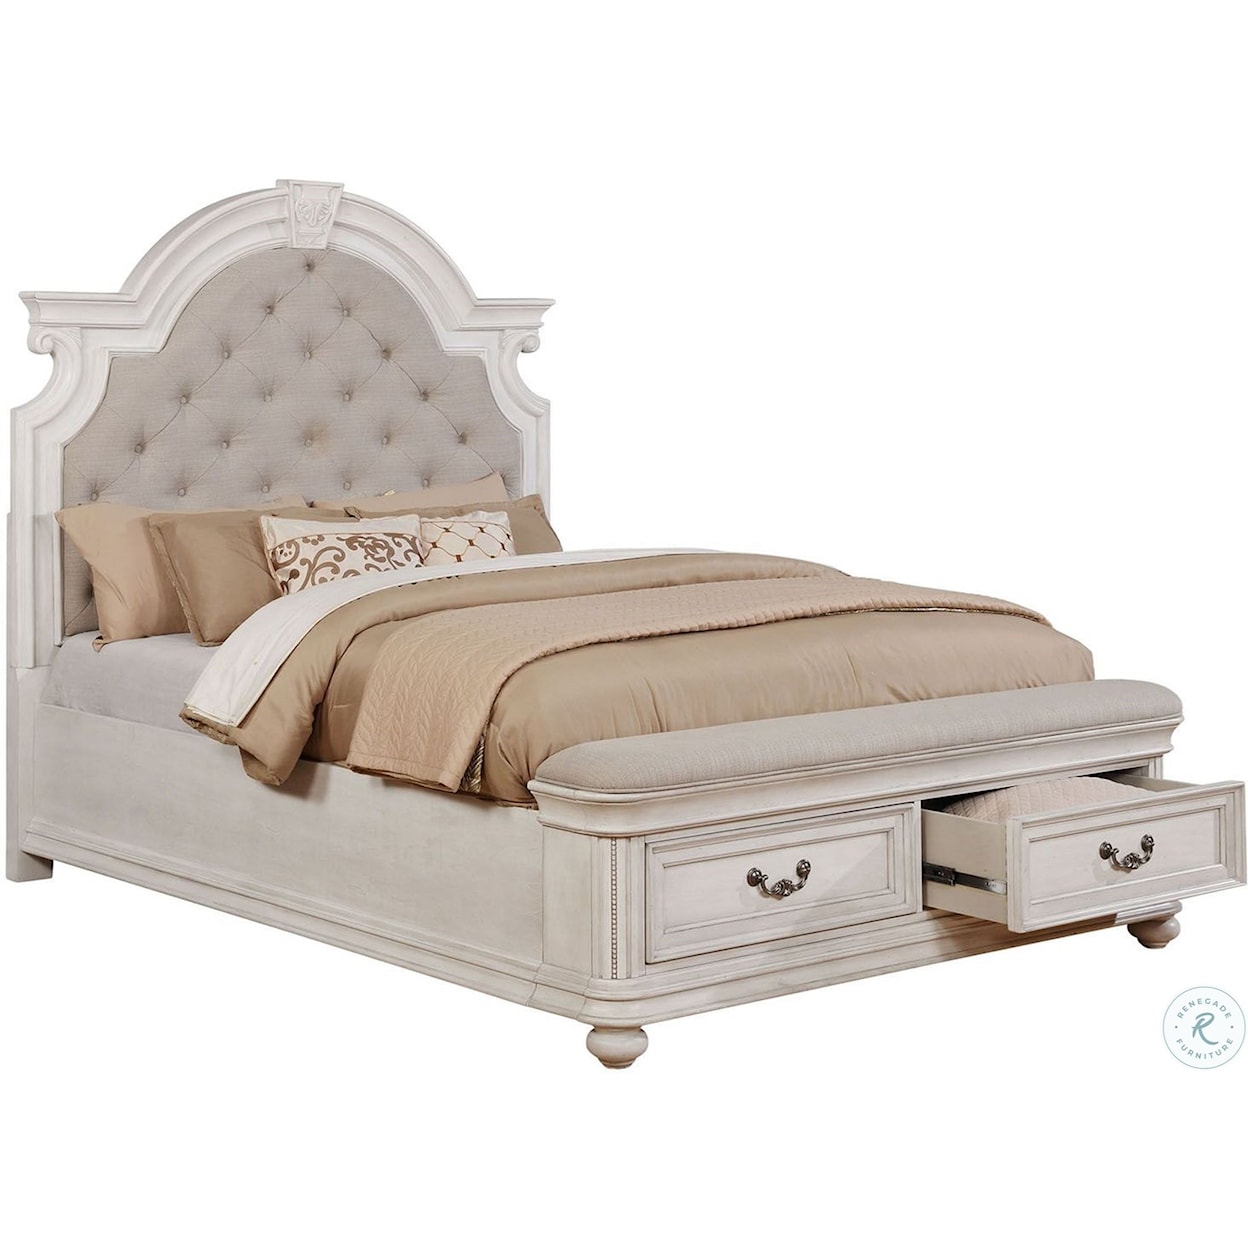 Avalon Furniture West Chester King Storage Bed